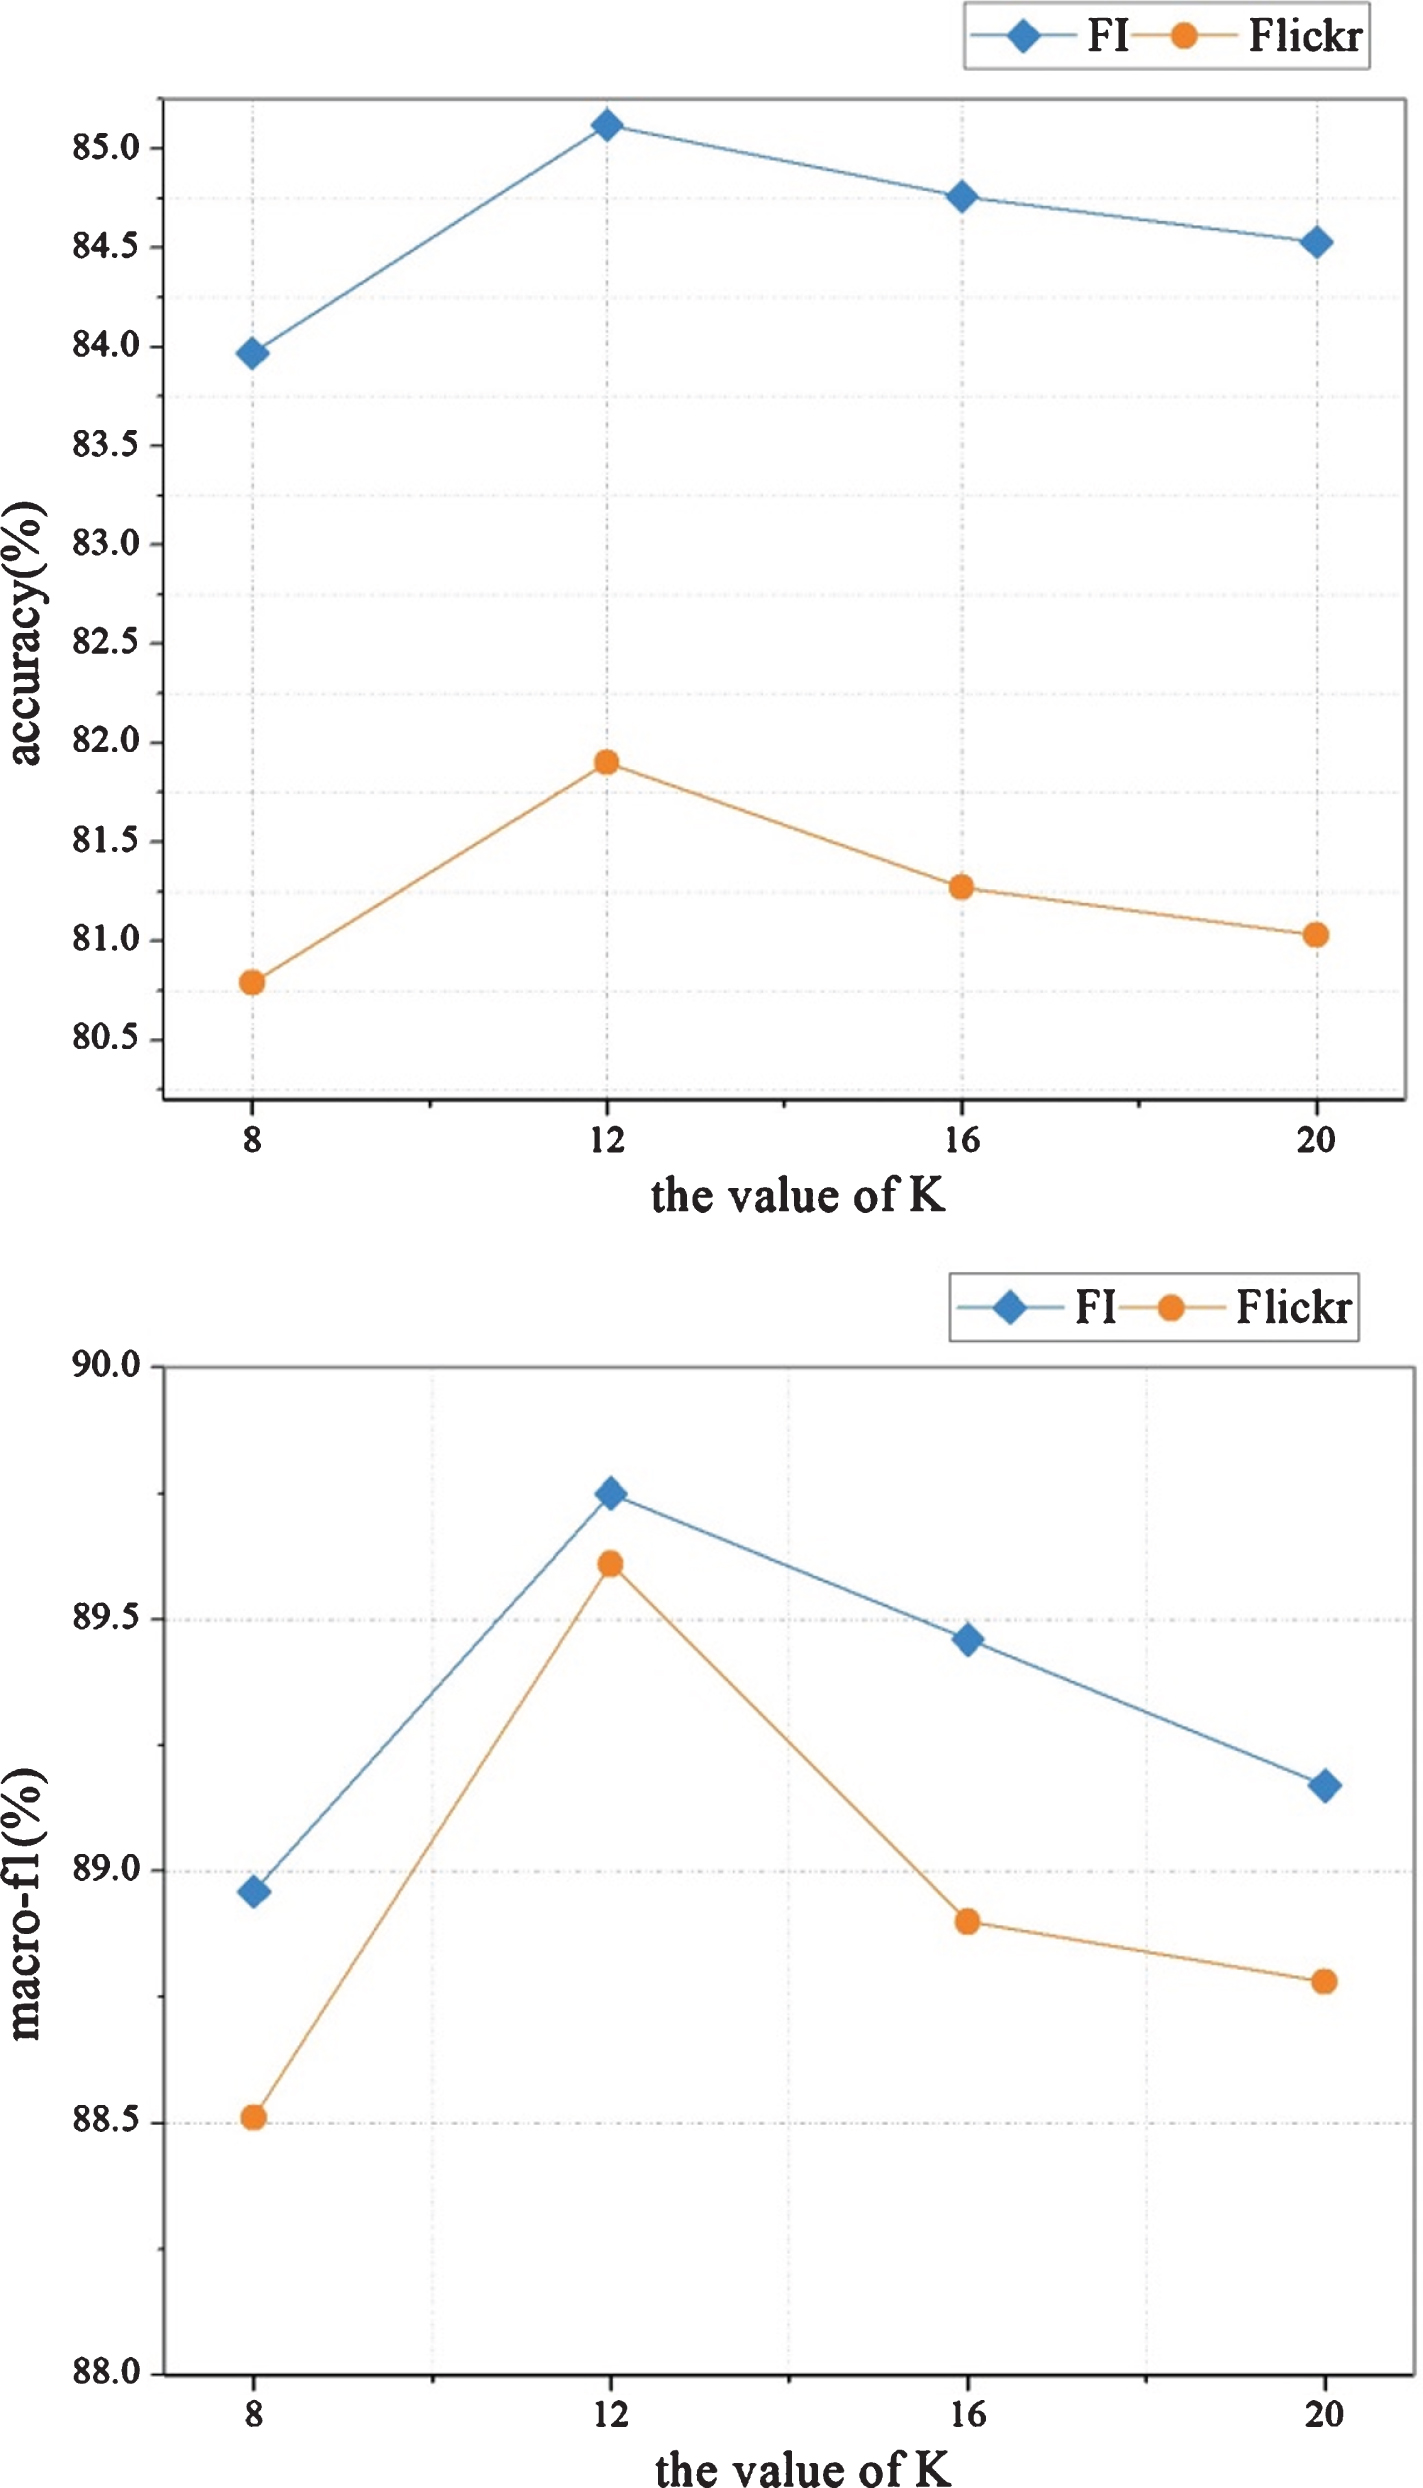 Accuracy and macro-f1 of different K values on the testing set of the FI and Flickr datasets.